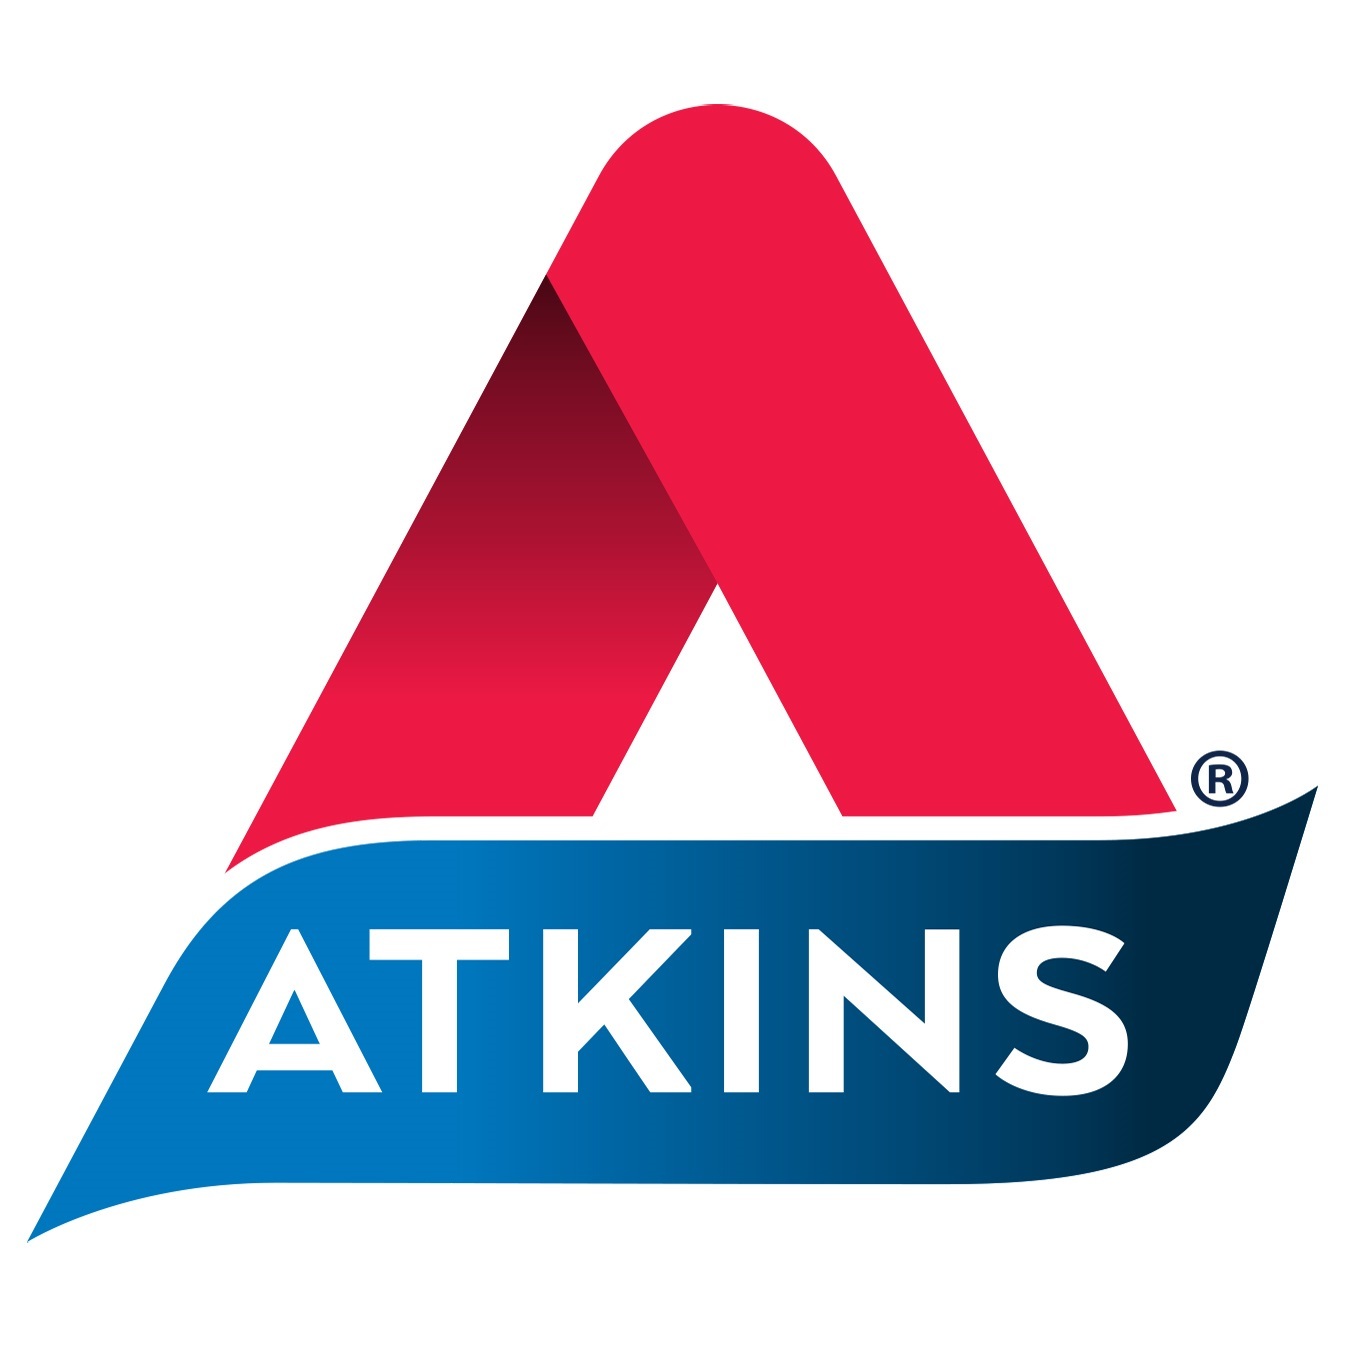 atkins-launches-any-questions-campaign-with-brand-spokesperson-rob-lowe